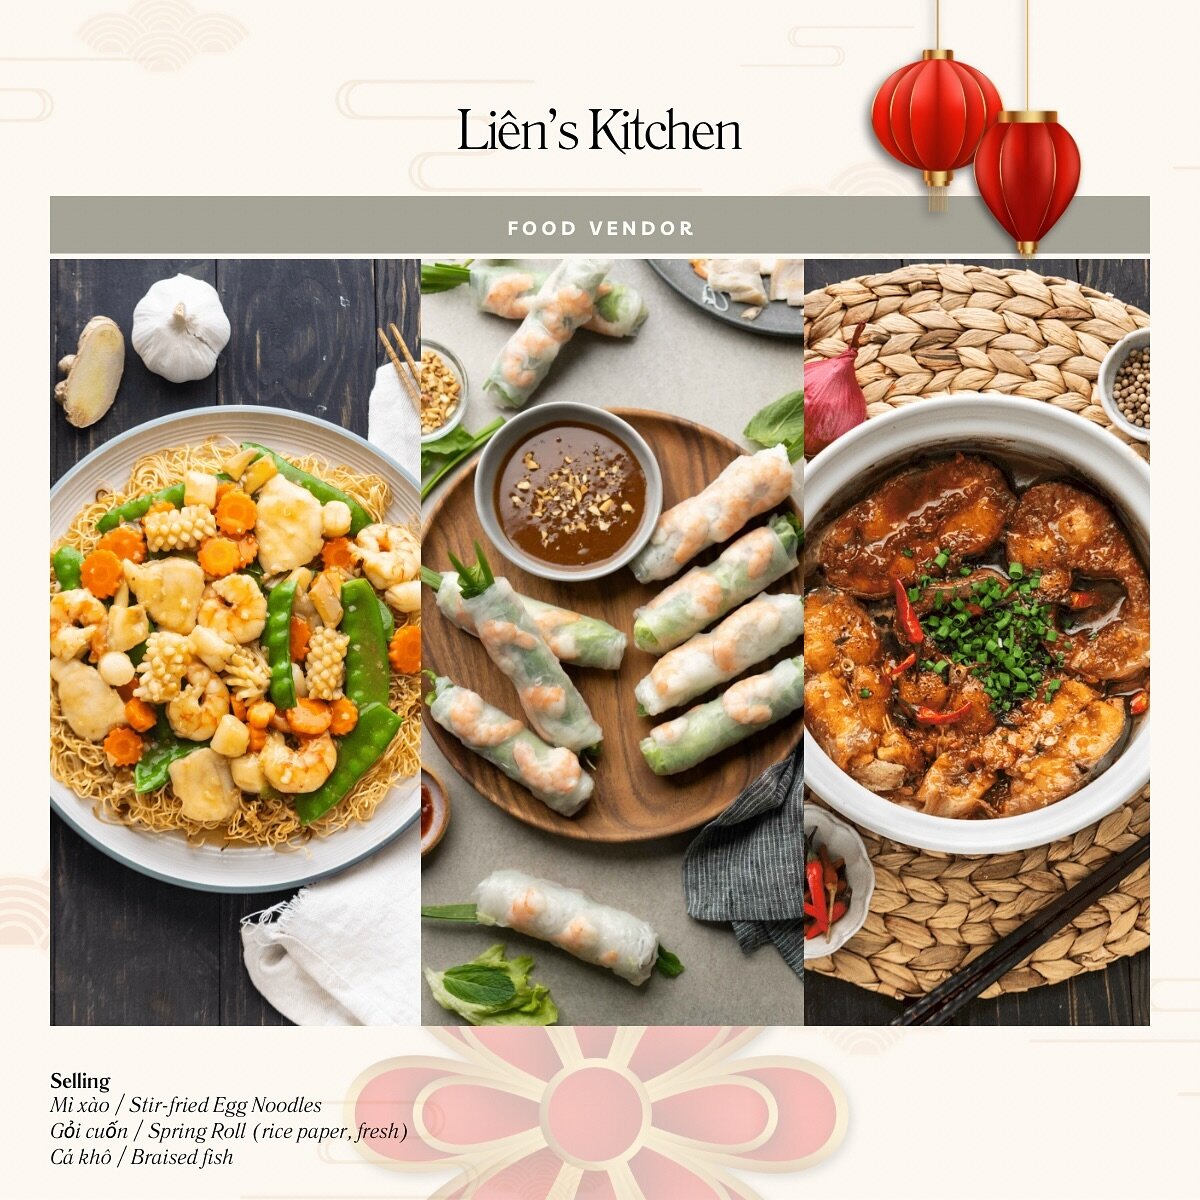 Adding a last minute foodie, we have Lien&rsquo;s Kitchen who will be bringing:
- M&igrave; x&agrave;o / Stir-fried Egg Noodles
- Gỏi cuốn / Spring Roll (rice paper, fresh)
- C&aacute; kh&ocirc; / Braised fish

#tet2024 #vietcharlotte